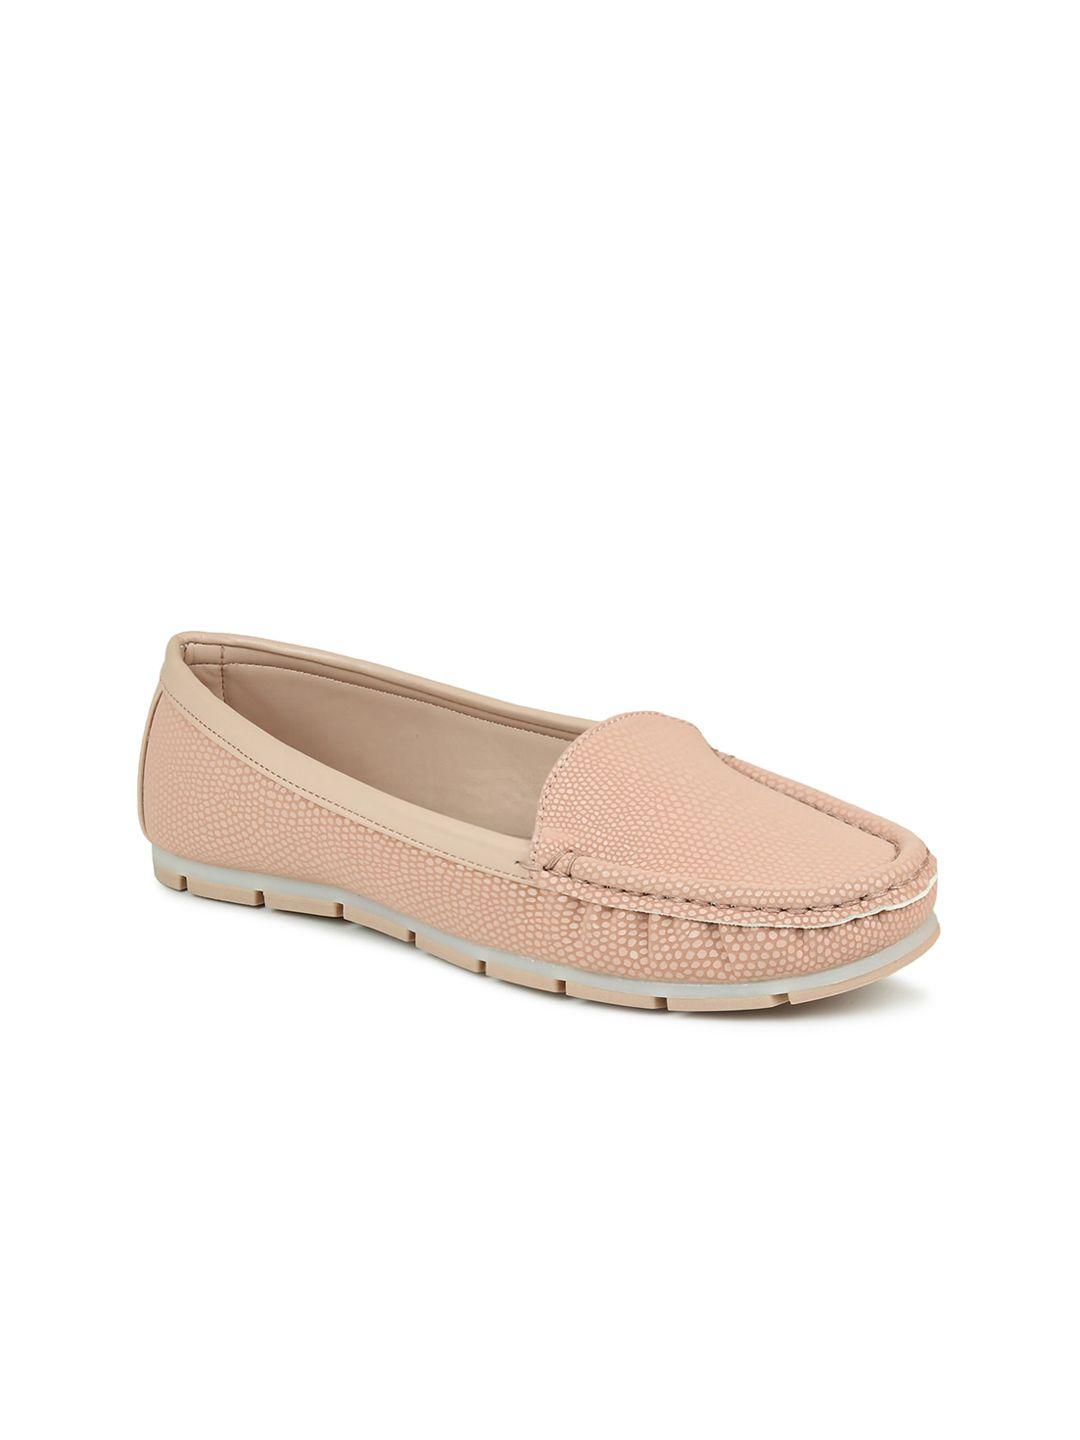 inc 5 women peach-coloured solid loafers